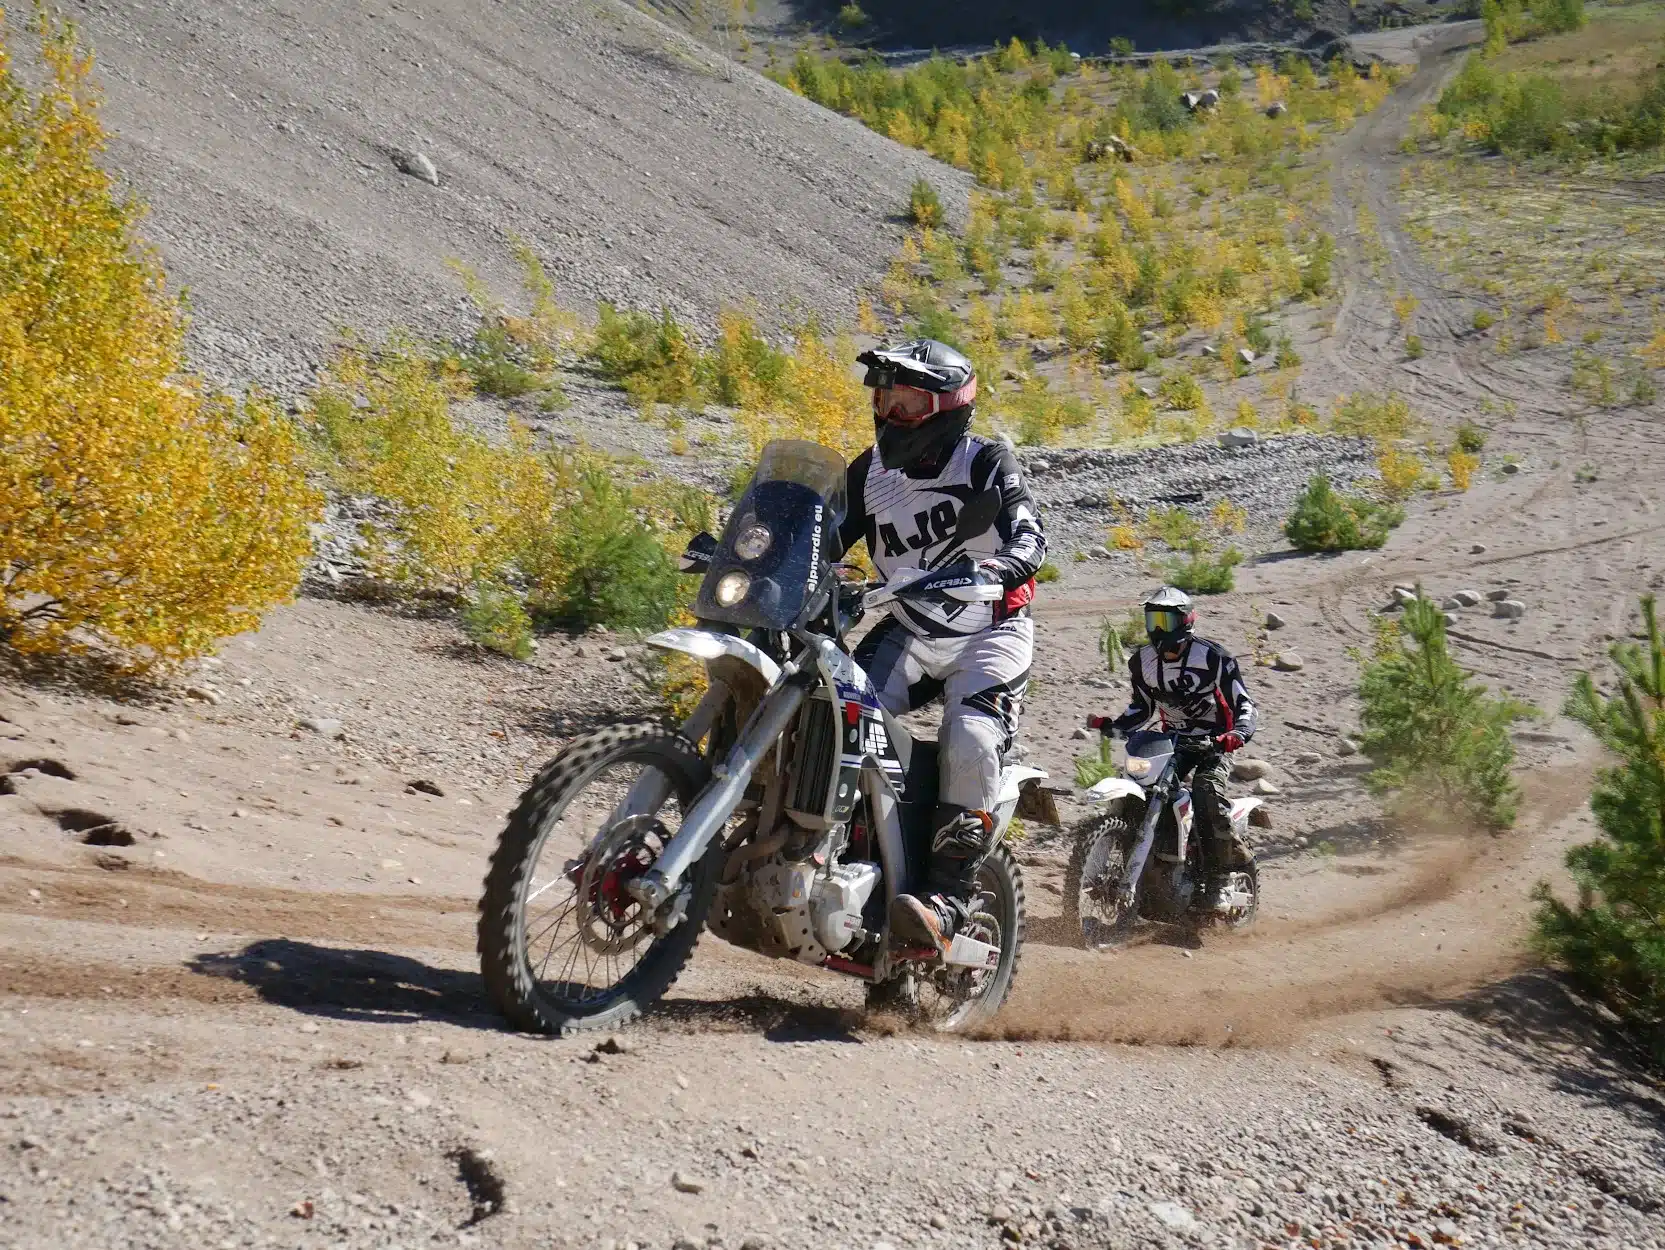 Two AJP motorcycles on a sand hill